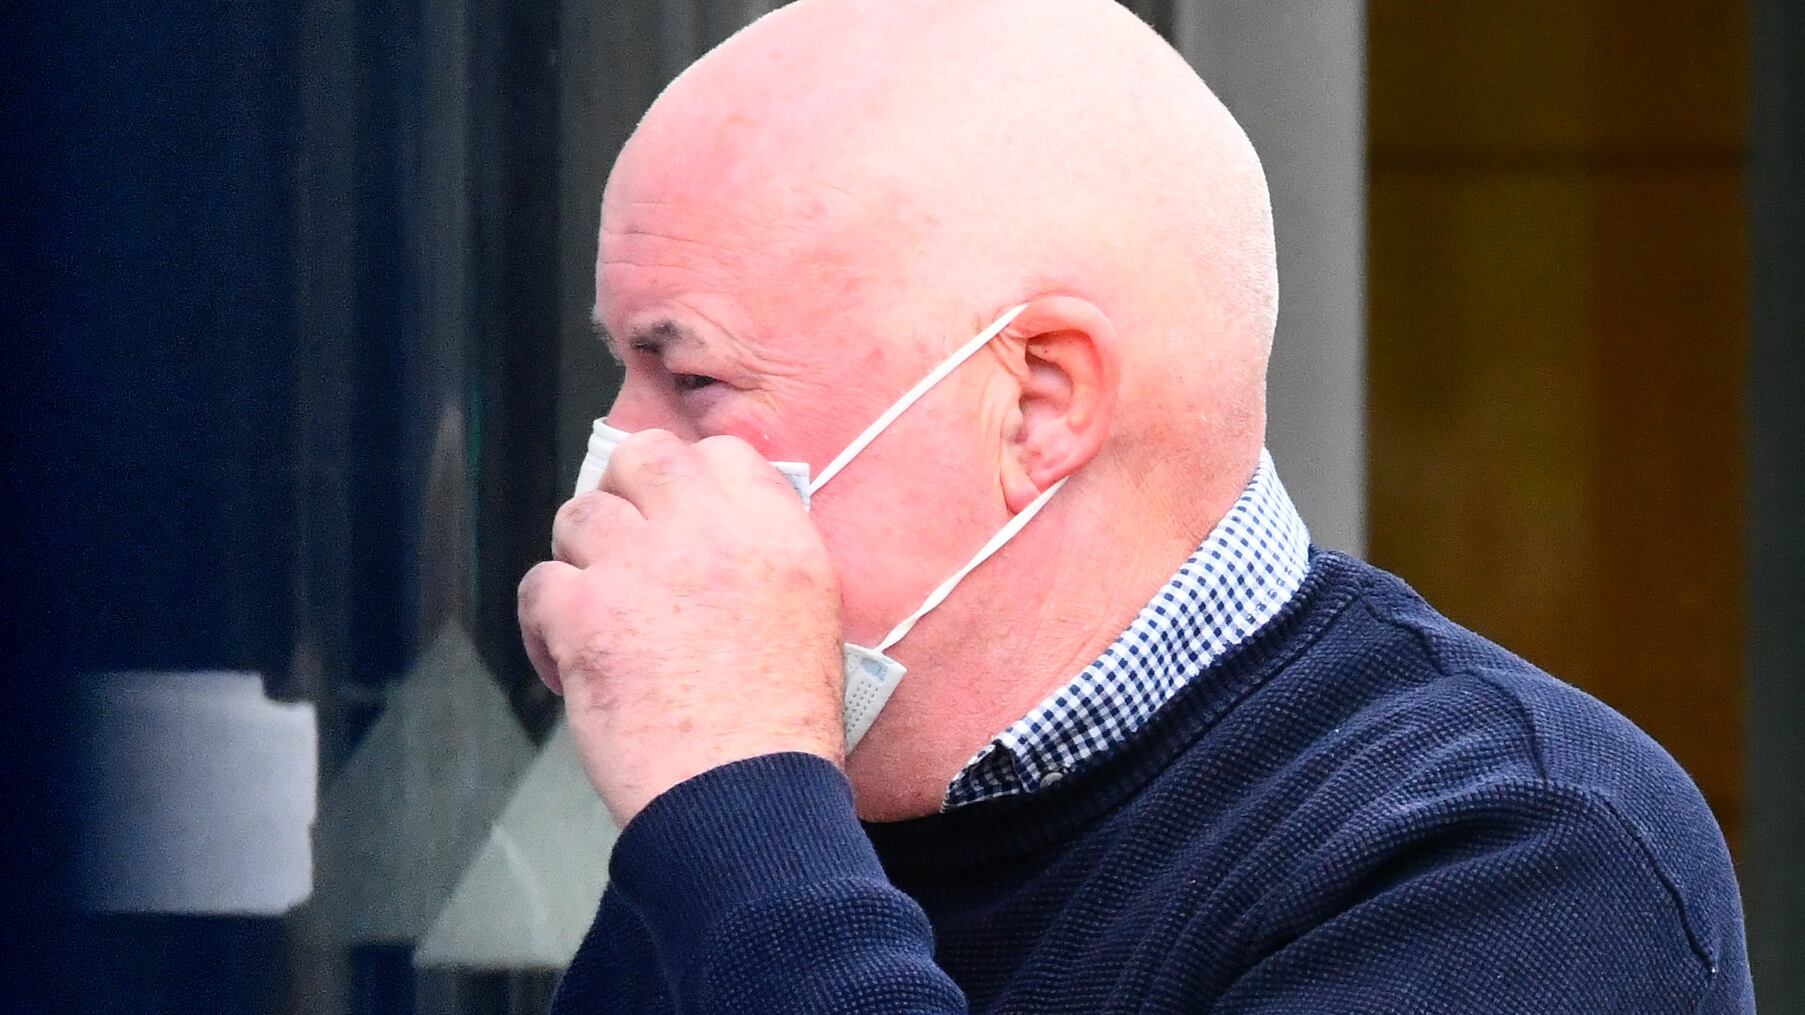 Alan Lewis - PhotopressBelfast.co.uk    10-6-2024
John Wilson leaves Belfast Crown Court today, (Monday), after denying charges arising from a security alert at the Henry Jones Playing Fields in east Belfast in August 2020.
Court Copy by Ashleigh McDonald via AM News
Mobile :  07968 698207